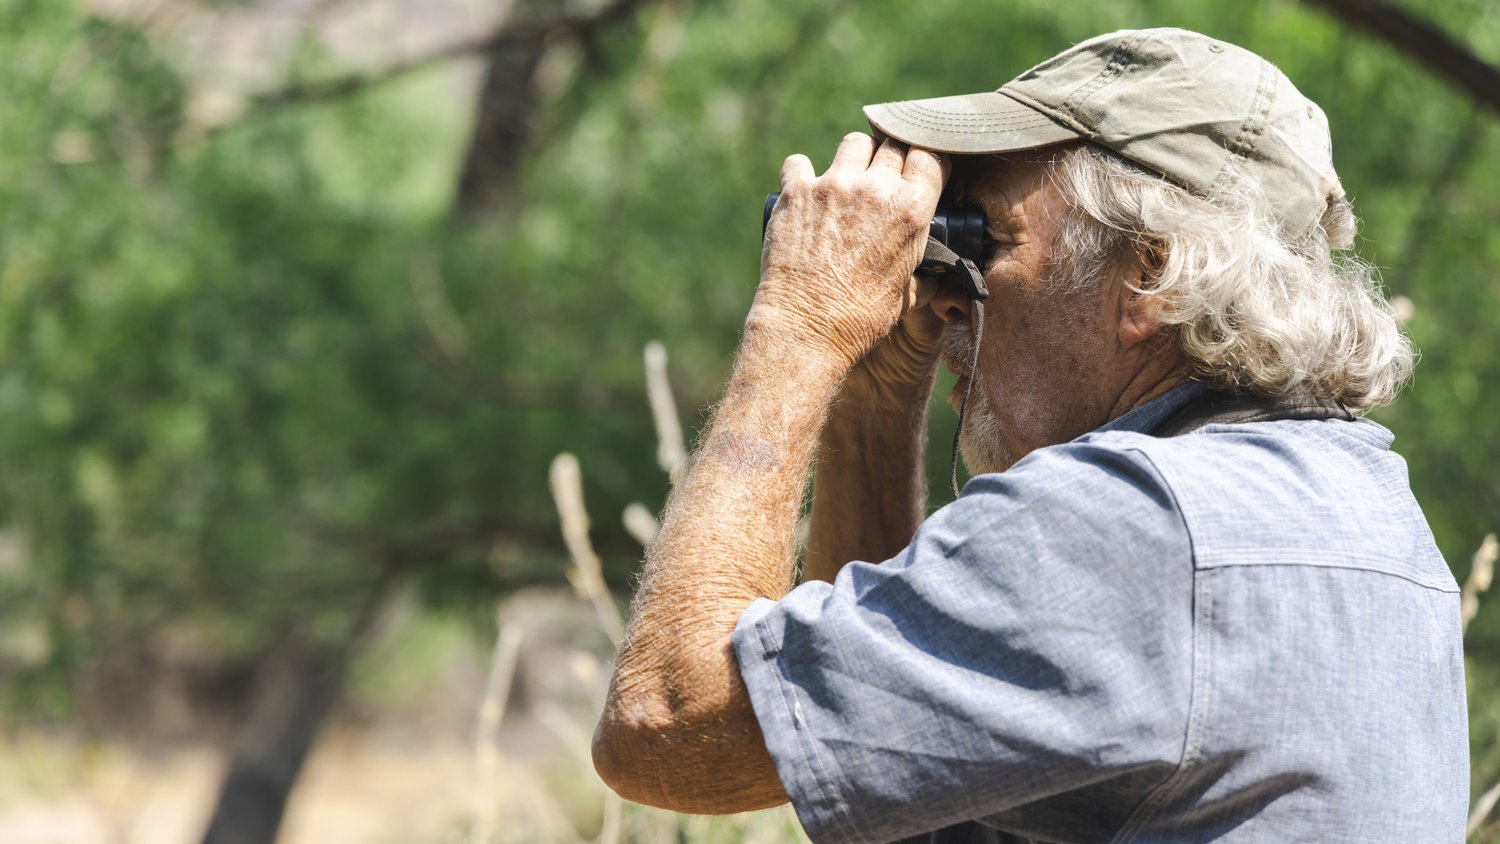 A side profile of a man holding binoculars up to his face as he looks left.